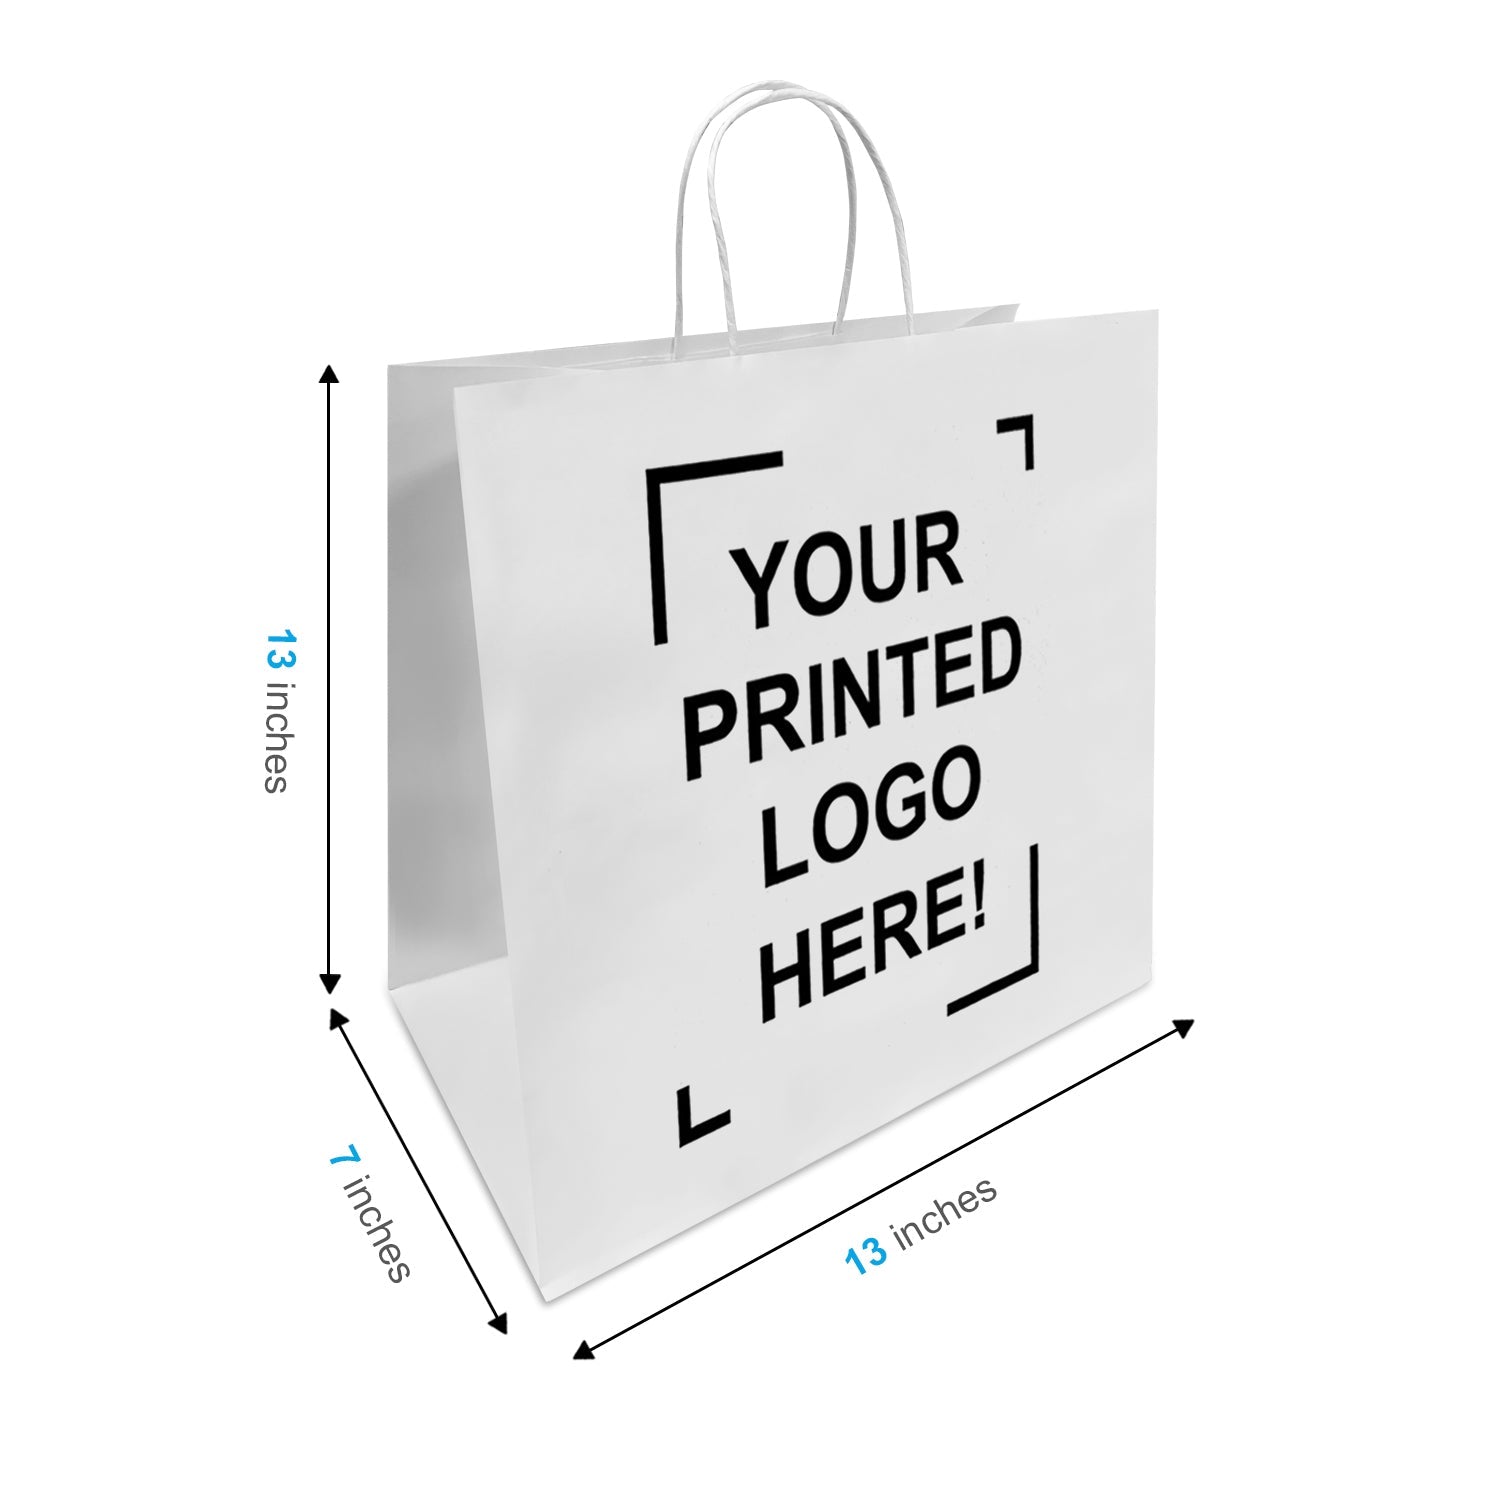 250 Pcs, Star, 13x7x13 inches, White Paper Bags, with Twisted Handle, Full Color Custom Print